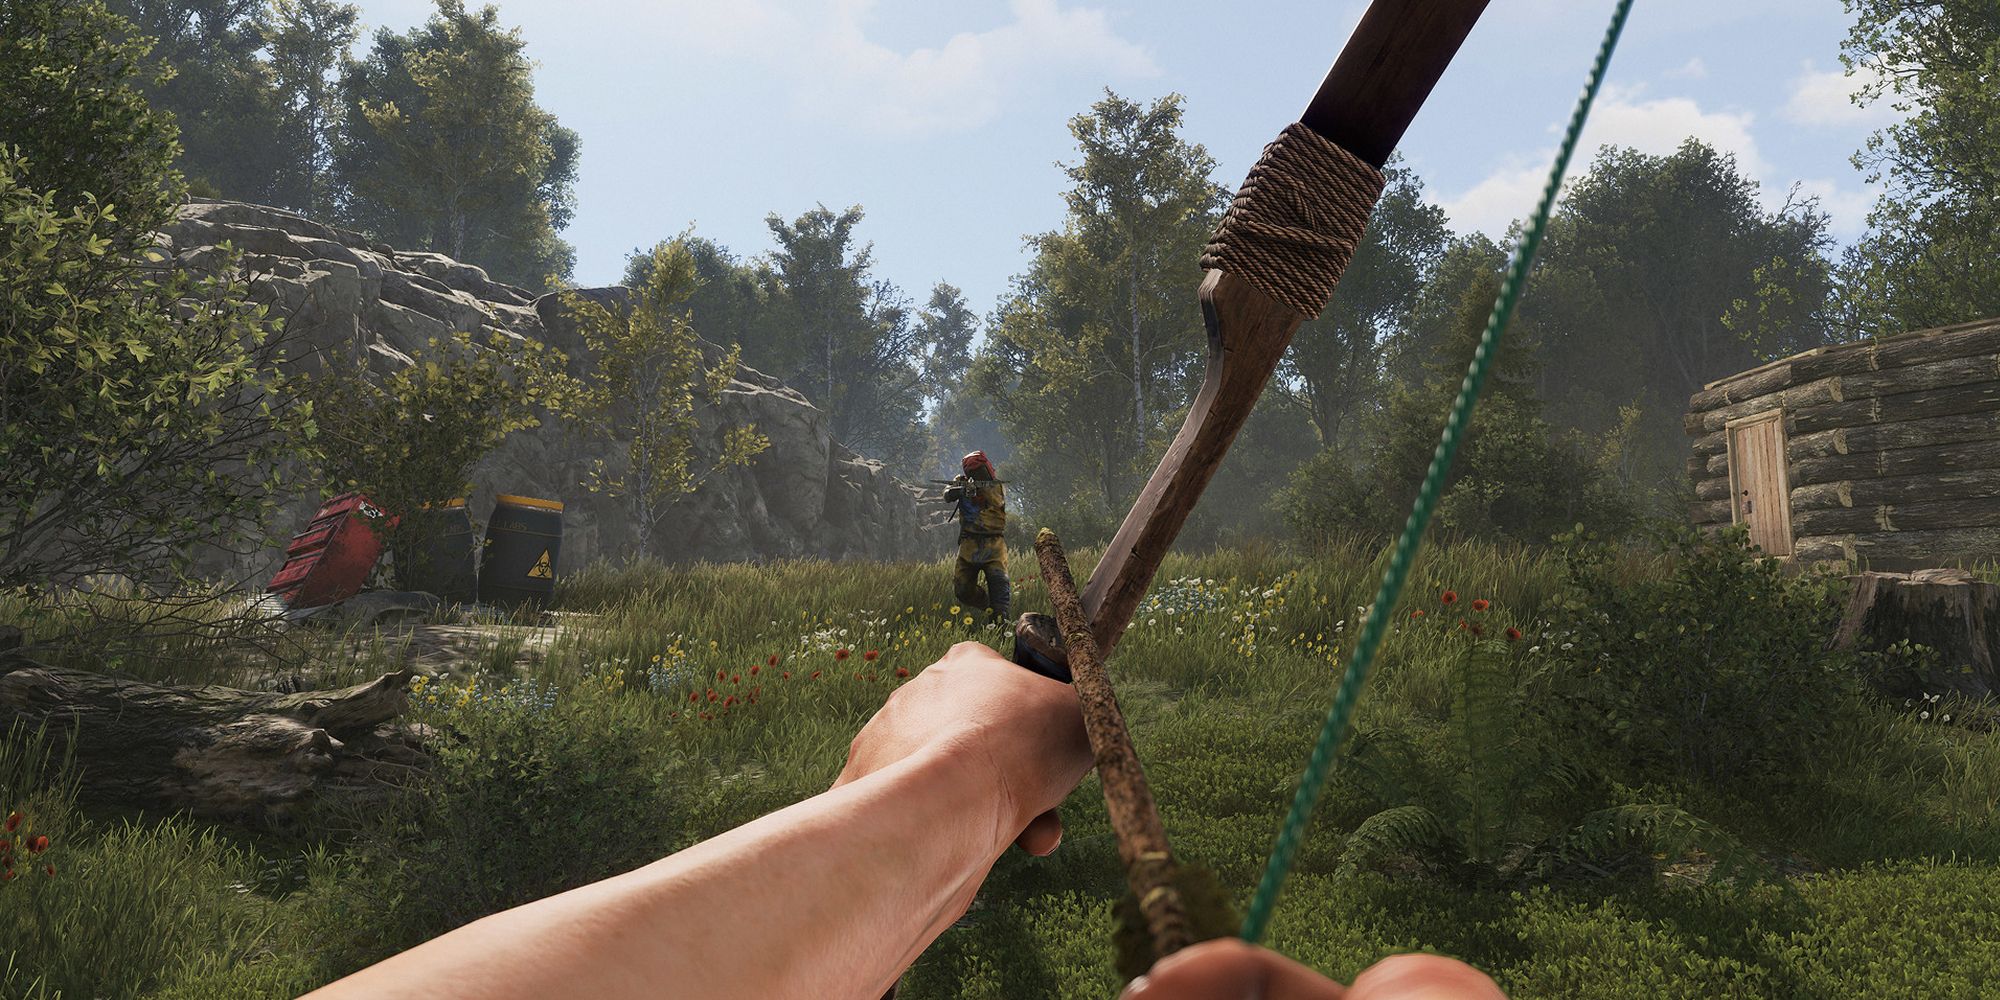 Aiming At A Rust Survivor With A Bow